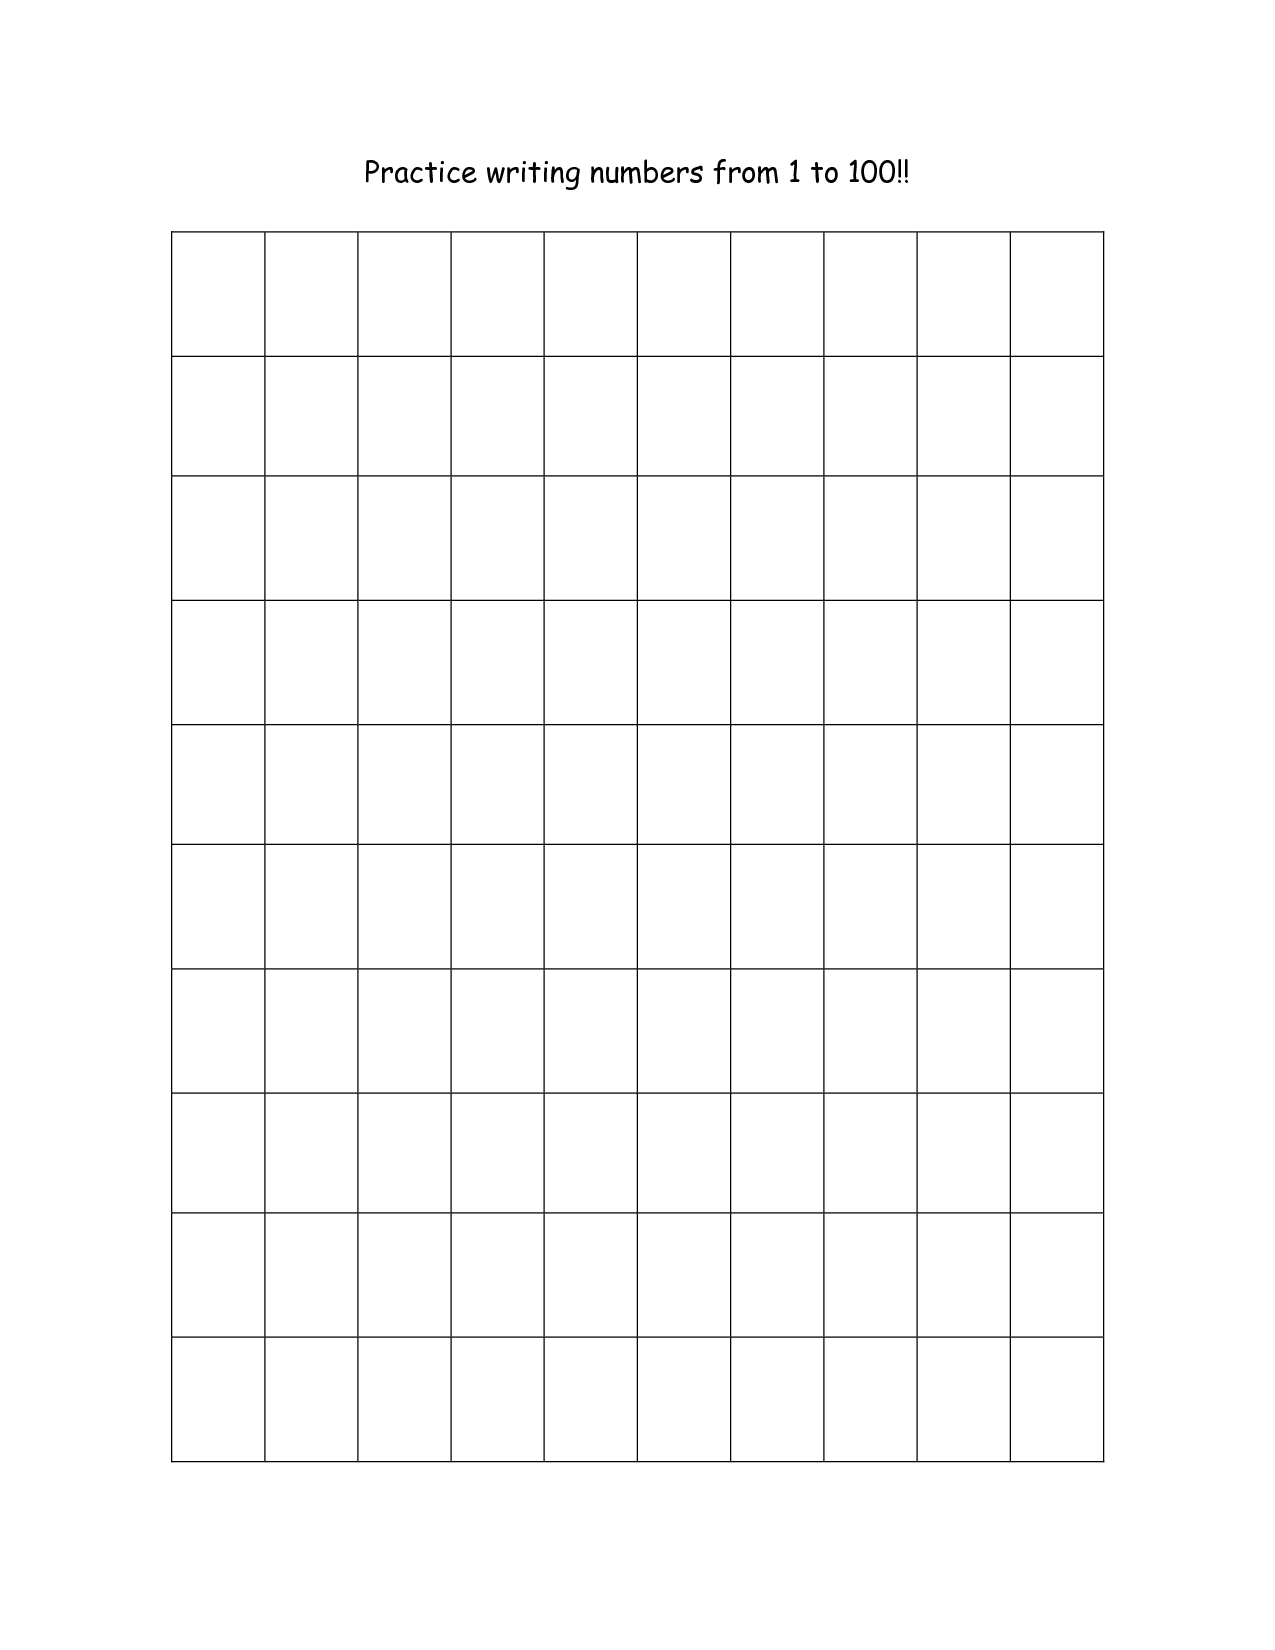 13-best-images-of-practice-writing-numbers-1-100-worksheet-number-practice-worksheets-1-100